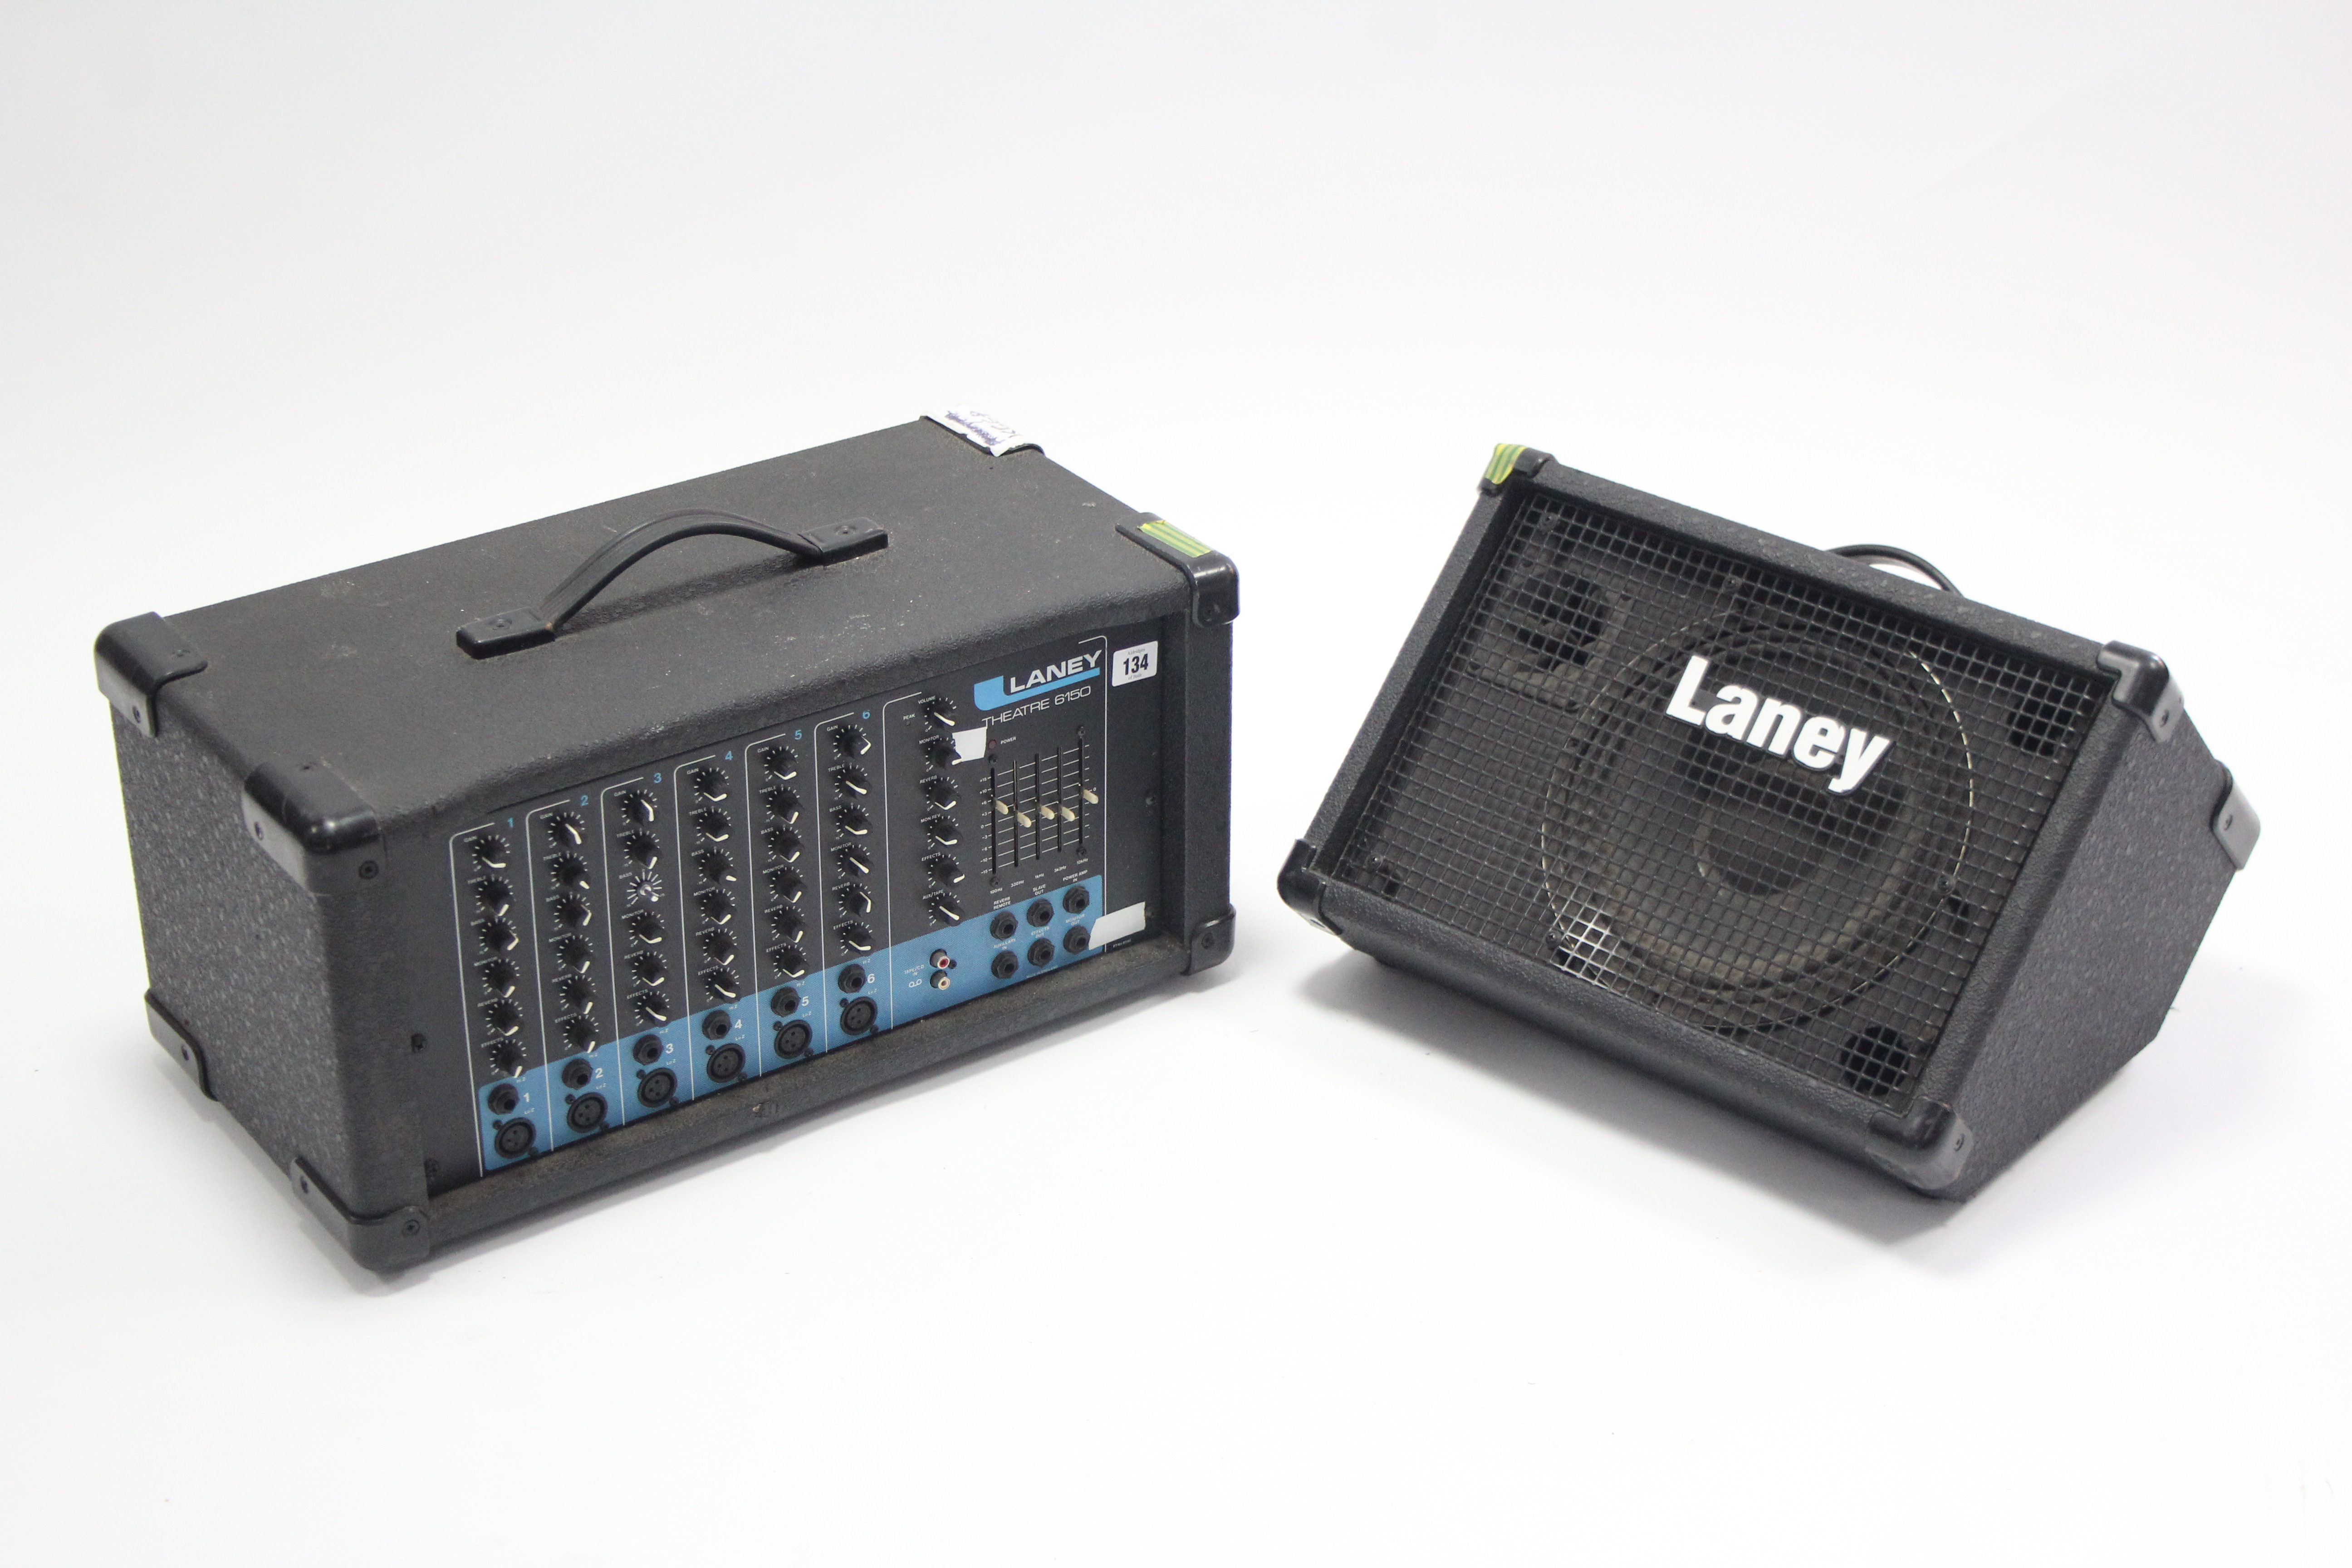 A Laney “Theatre 6150” amplifier; & another Laney amplifier.